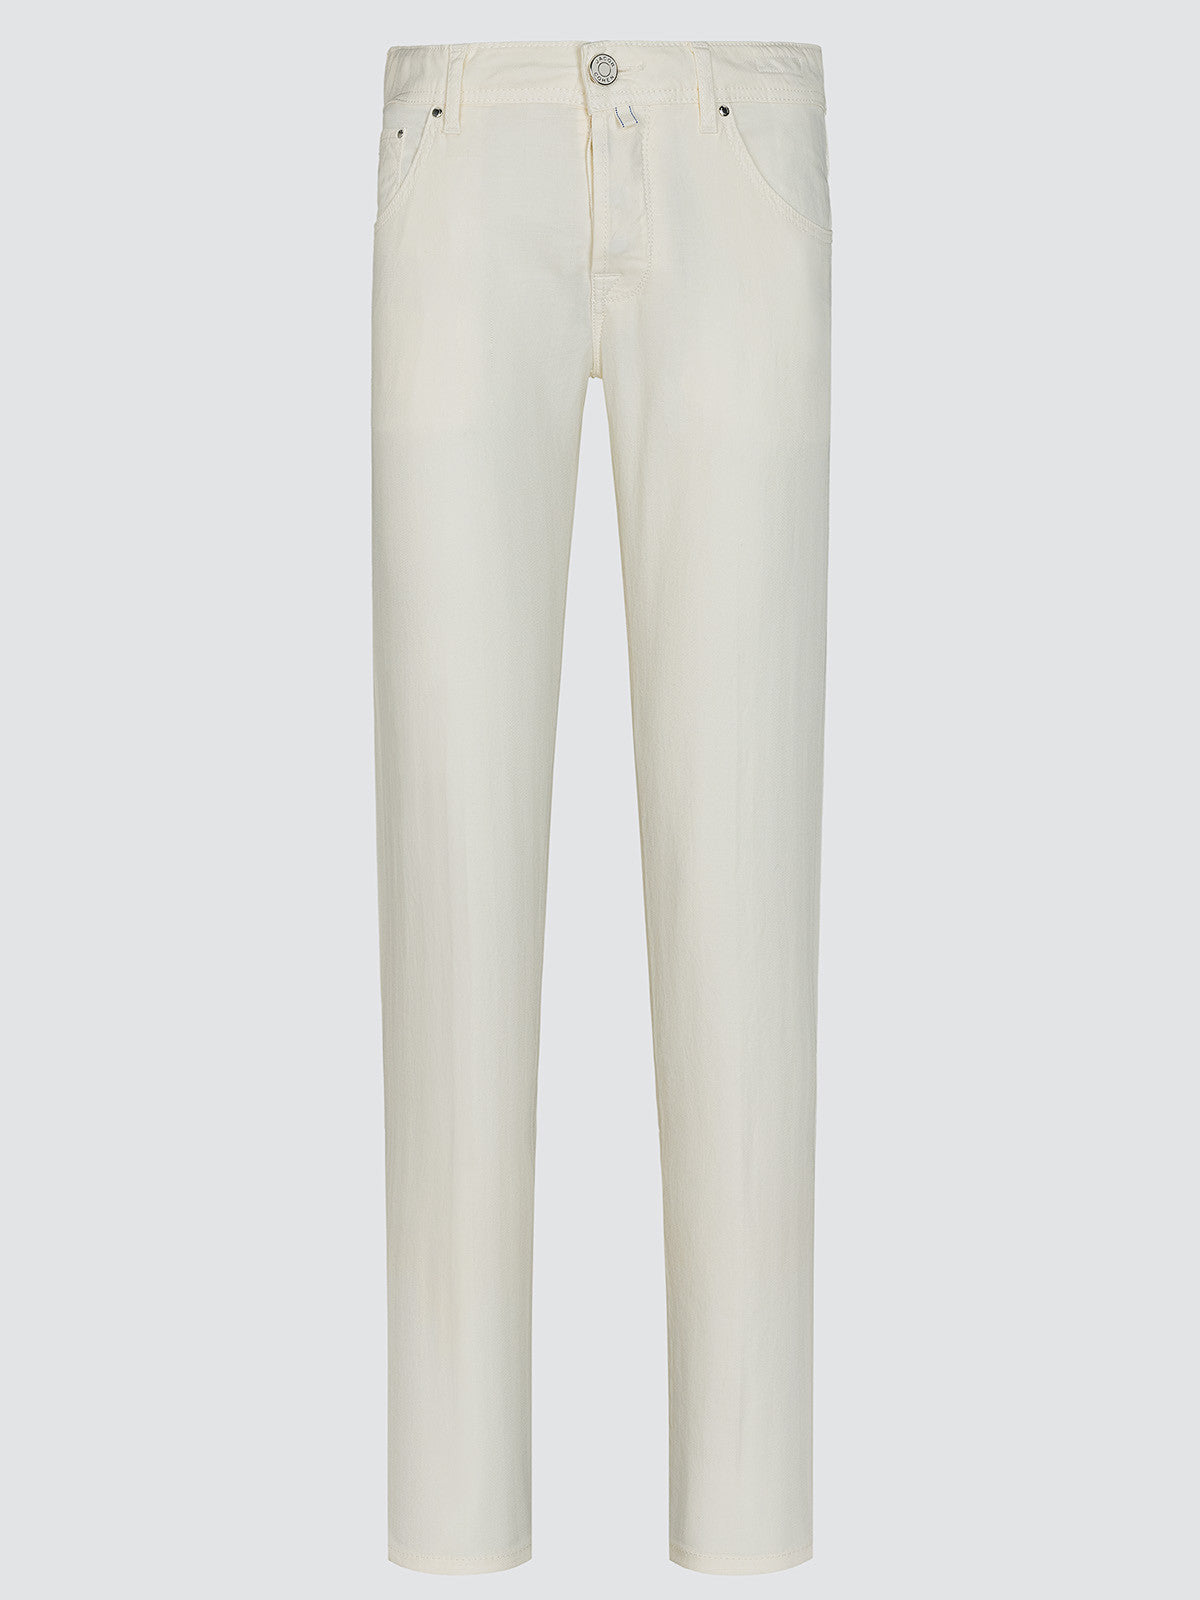 SCOTT CROPPED JEANS IN OFF WHITE COTTON AND LINEN HERRINGBONE